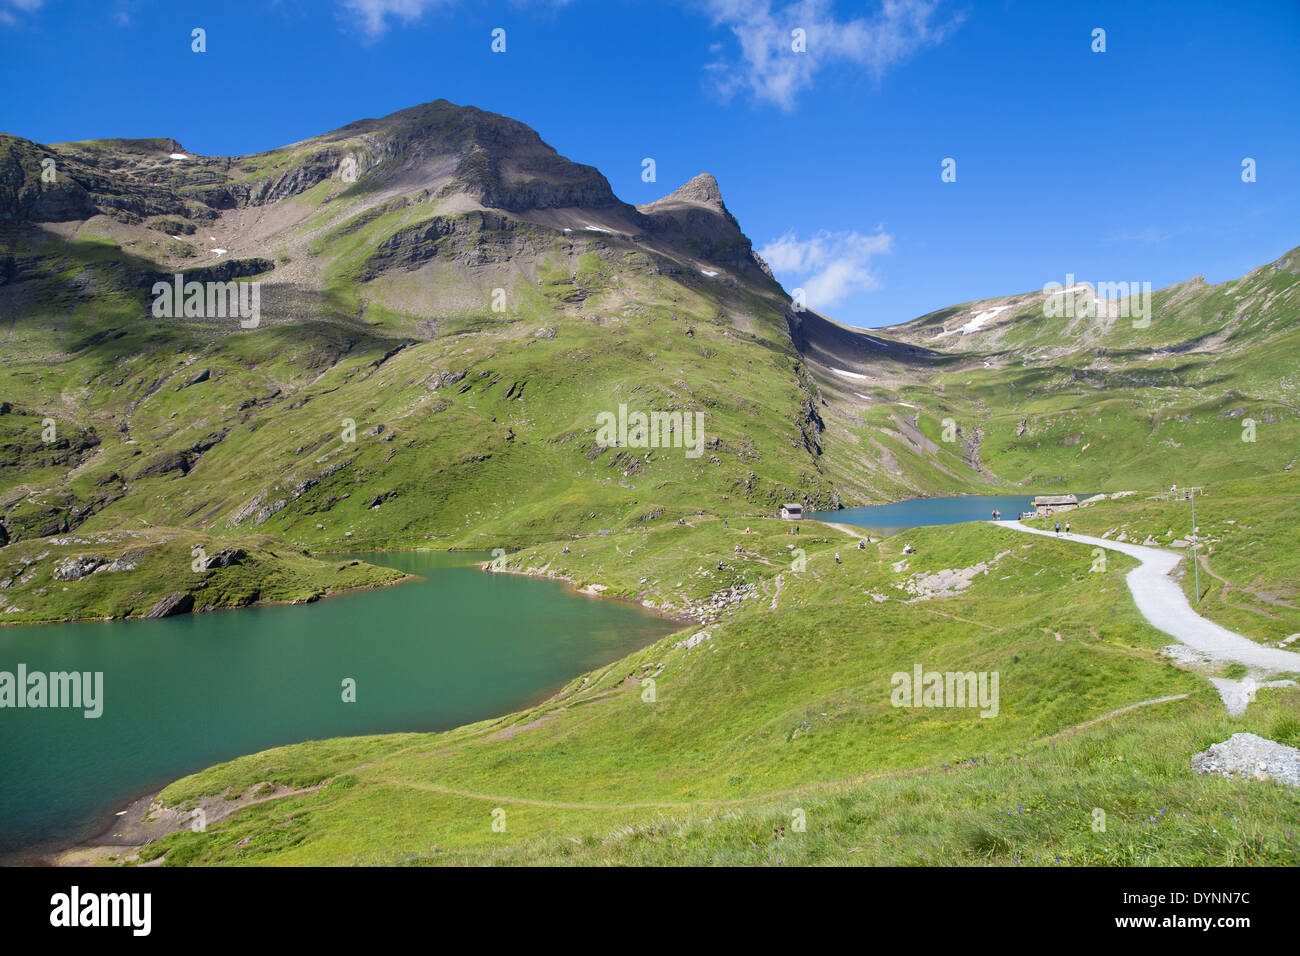 Bachalpsee laghi in Grindelwald, Svizzera. Foto Stock